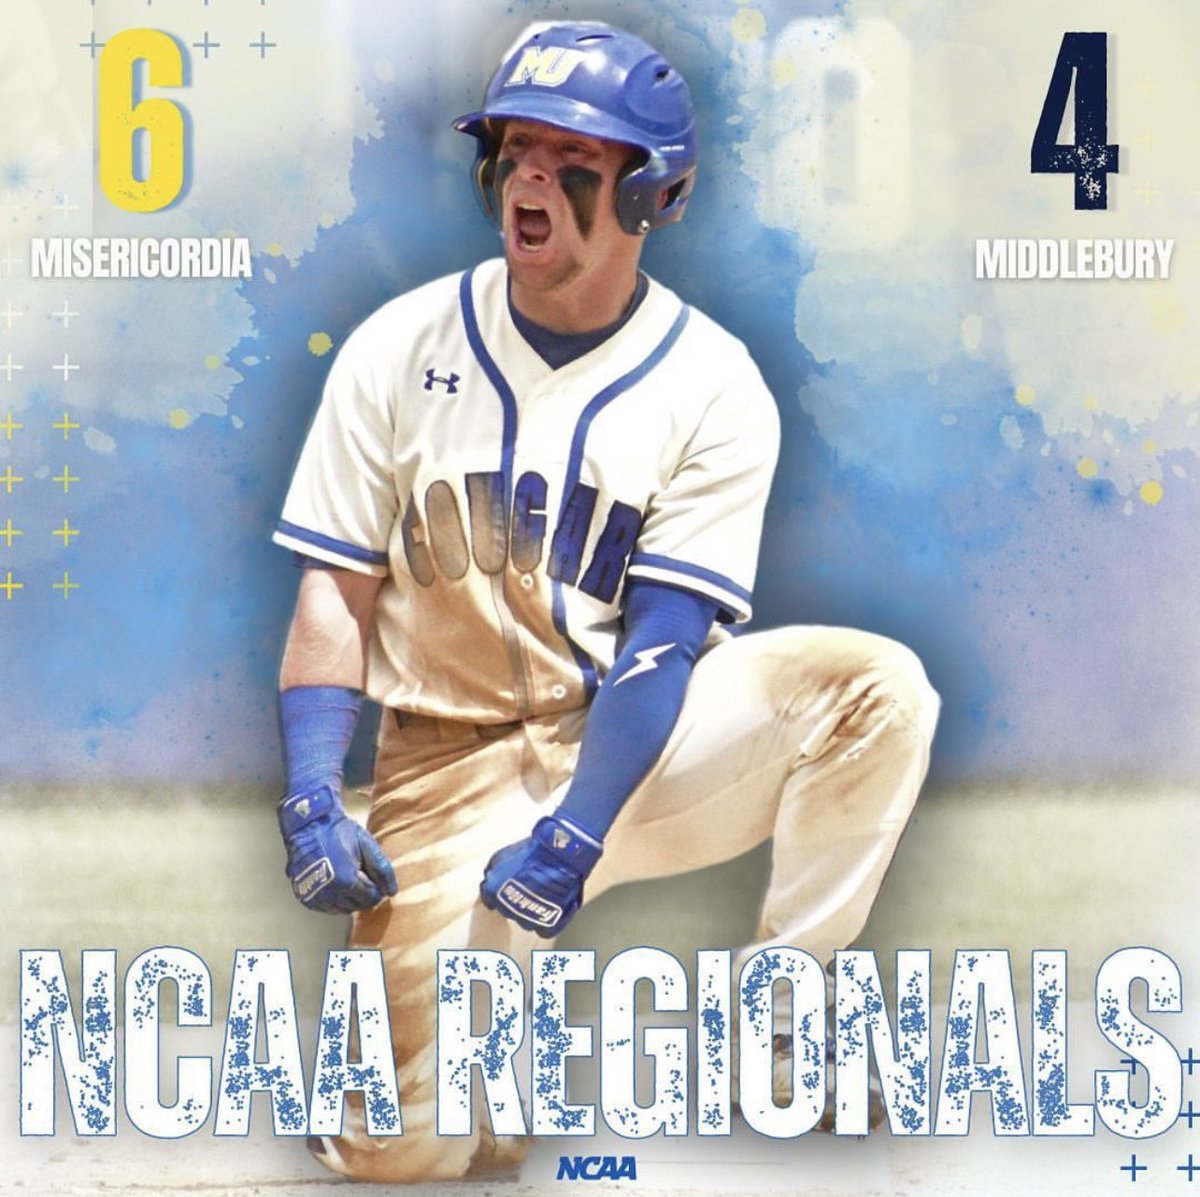 | DALLAS REGIONAL CHAMPS | Cougs win 3 straight games on the weekend to capture a Regional Championship in back to back seasons. We await the results of Newport News Regional for details of Super Regional round. #ALL9